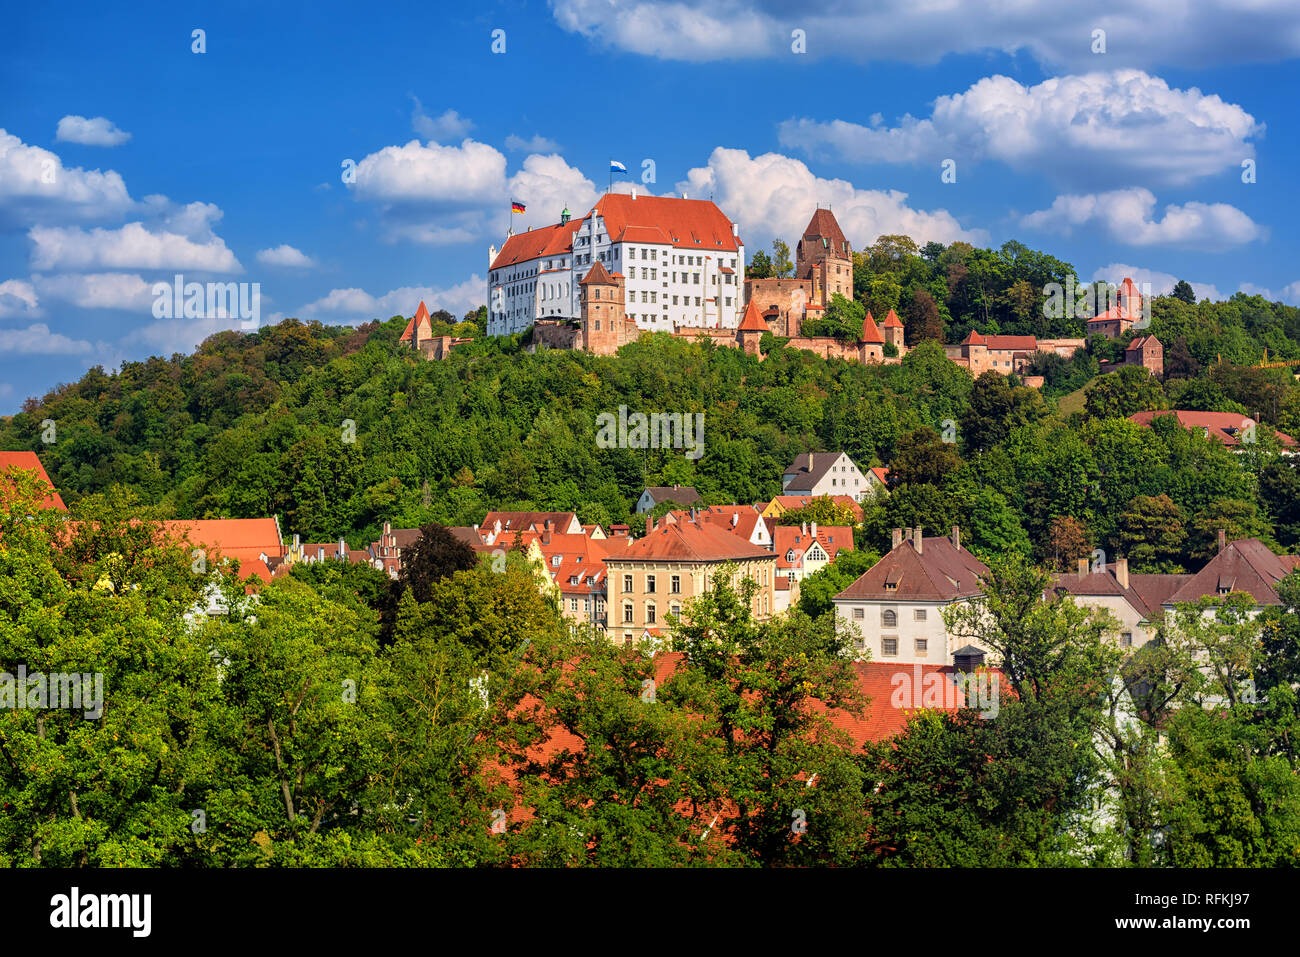 Landshut, historical gothic Burg Trausnitz castle on a hill over the old town, Bavaria, Germany Stock Photo